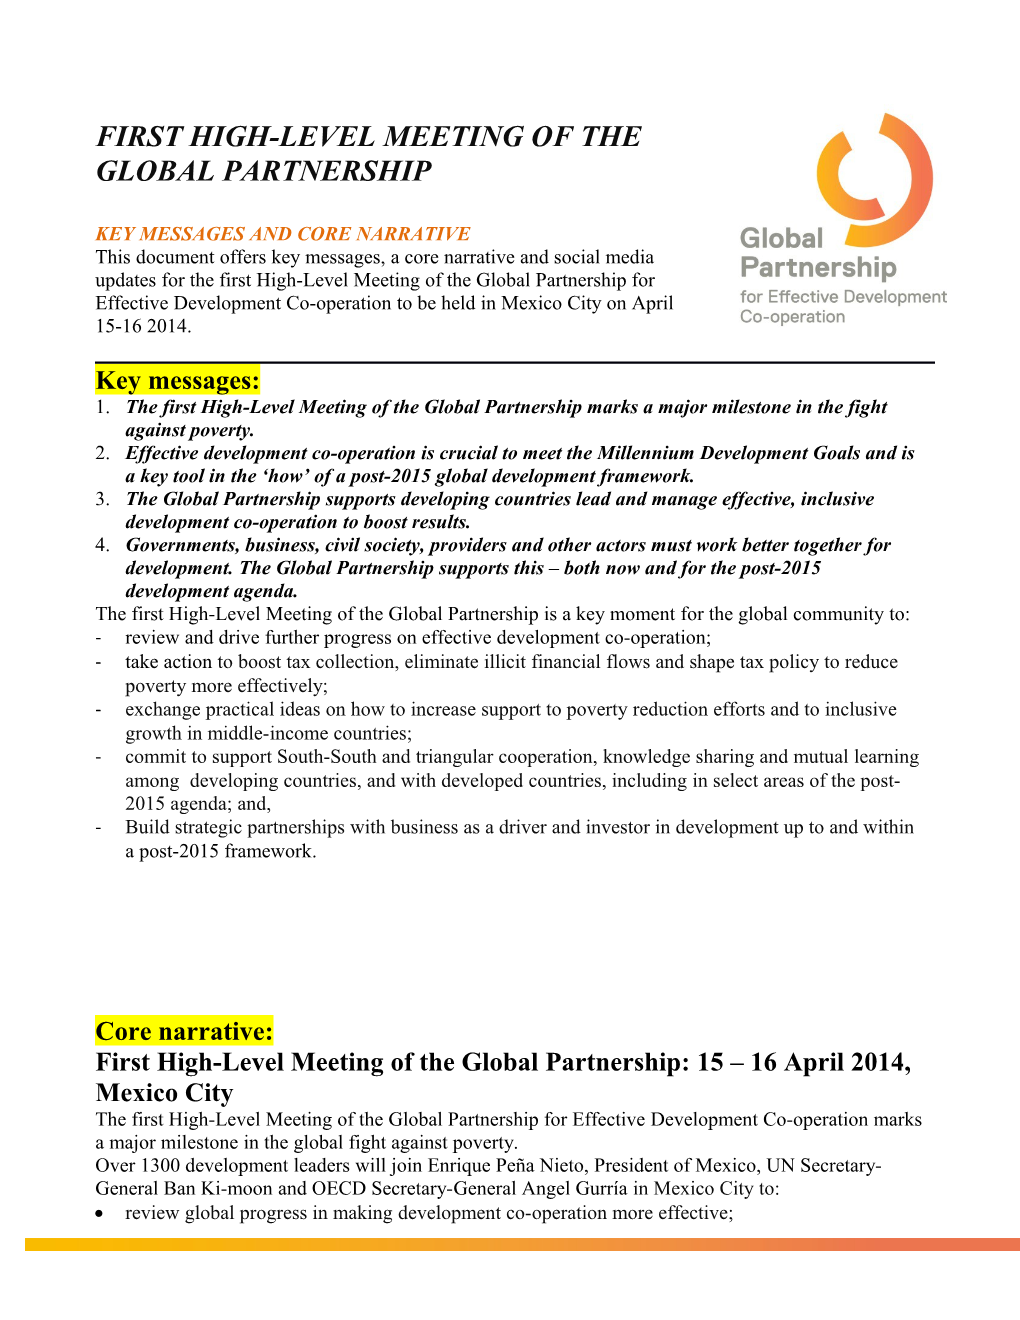 First High-Level Meeting of the Global Partnership